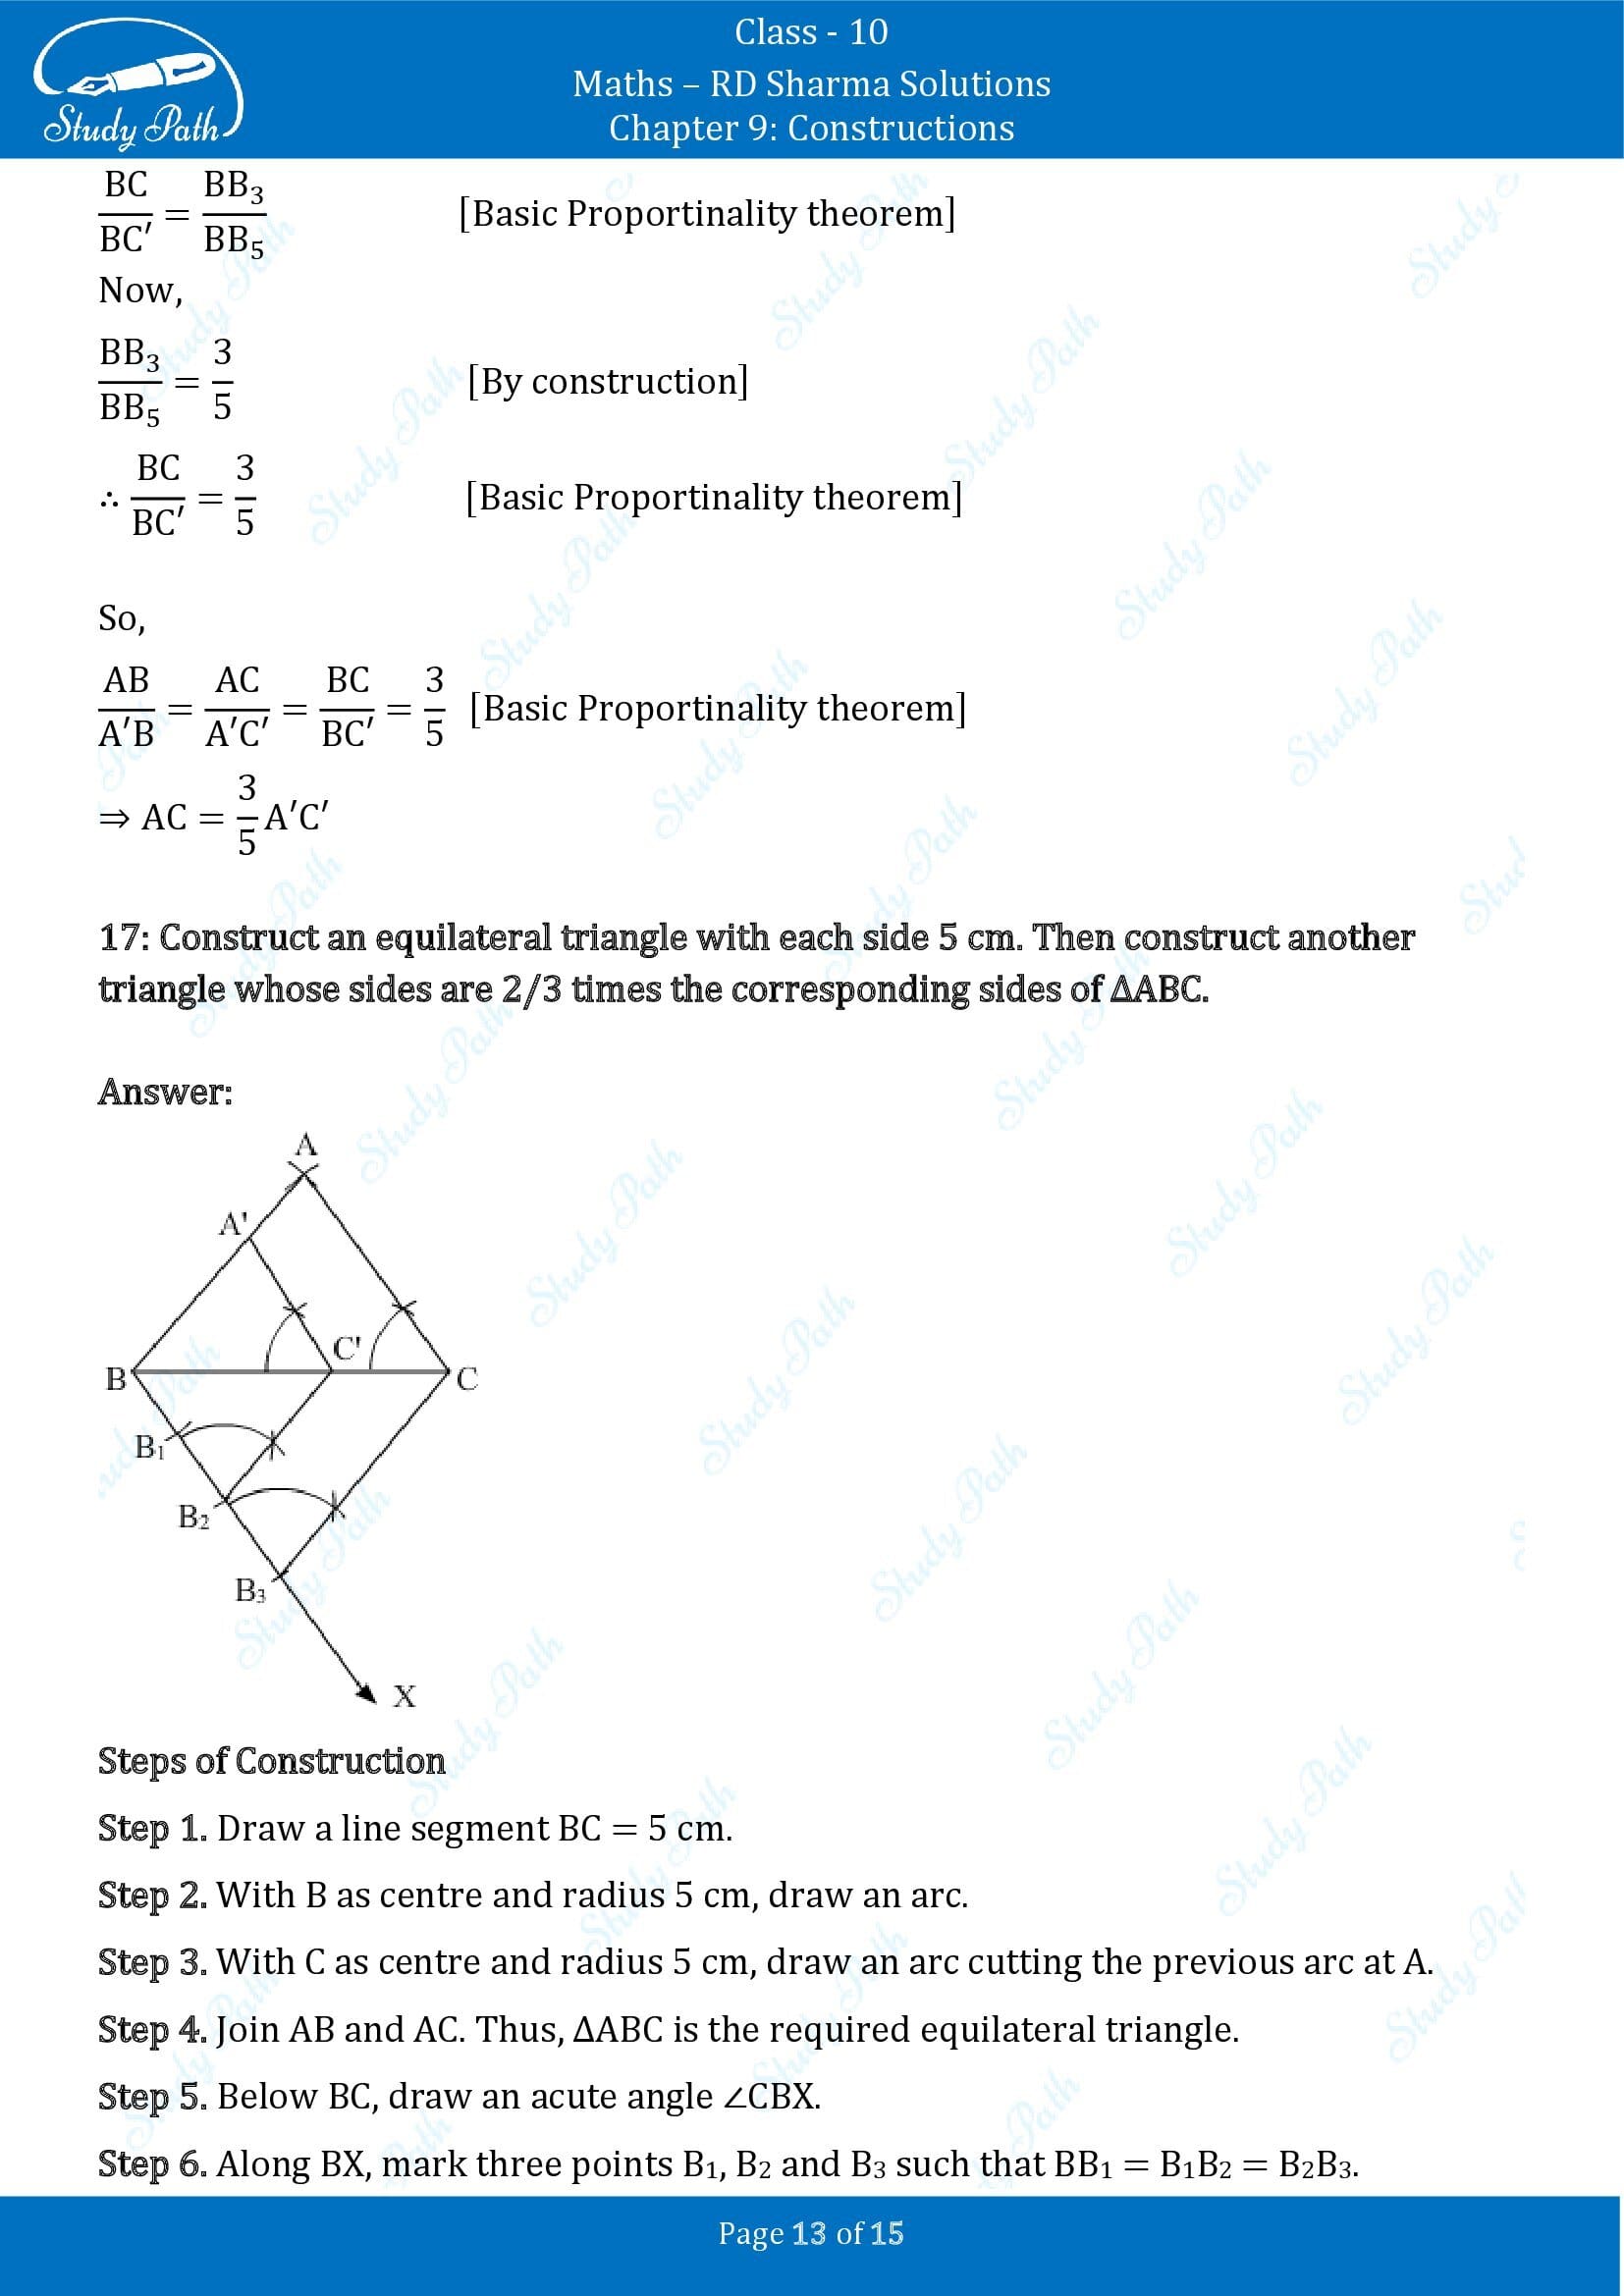 RD Sharma Solutions Class 10 Chapter 9 Constructions Exercise 9.2 00013